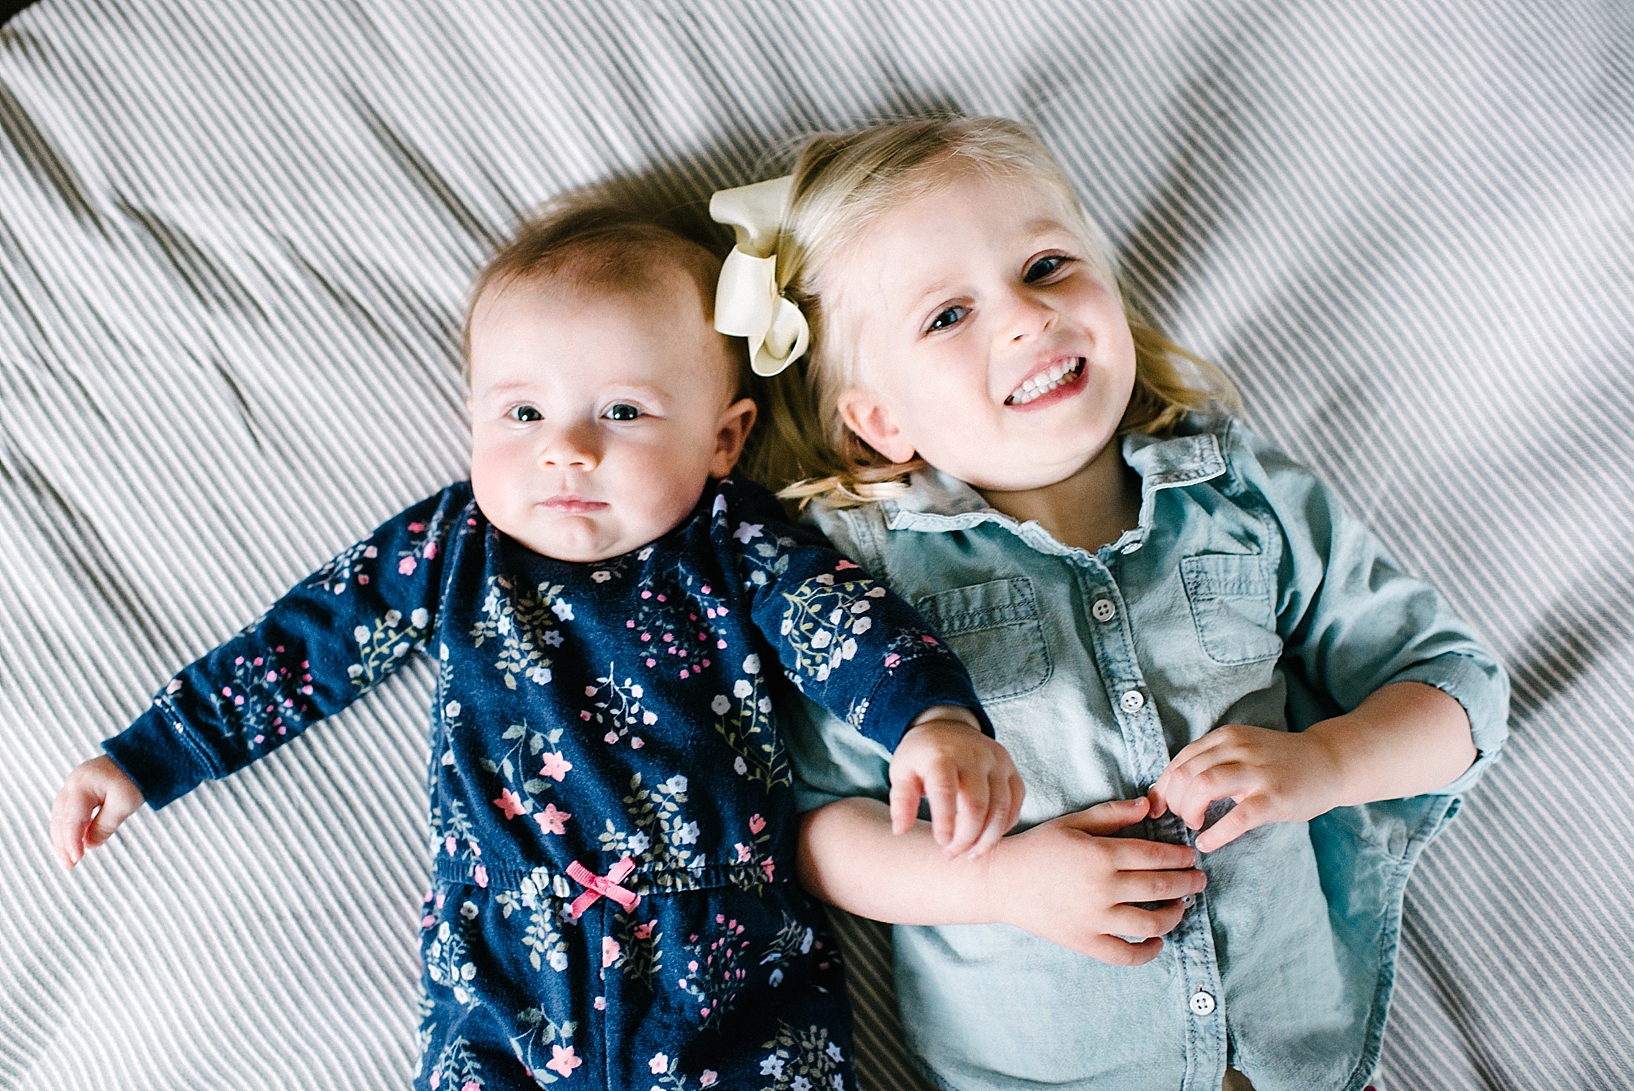 baby girl wearing floral romper and toddler girl with blonde hair wearing denim shirt laying on striped bed sheet